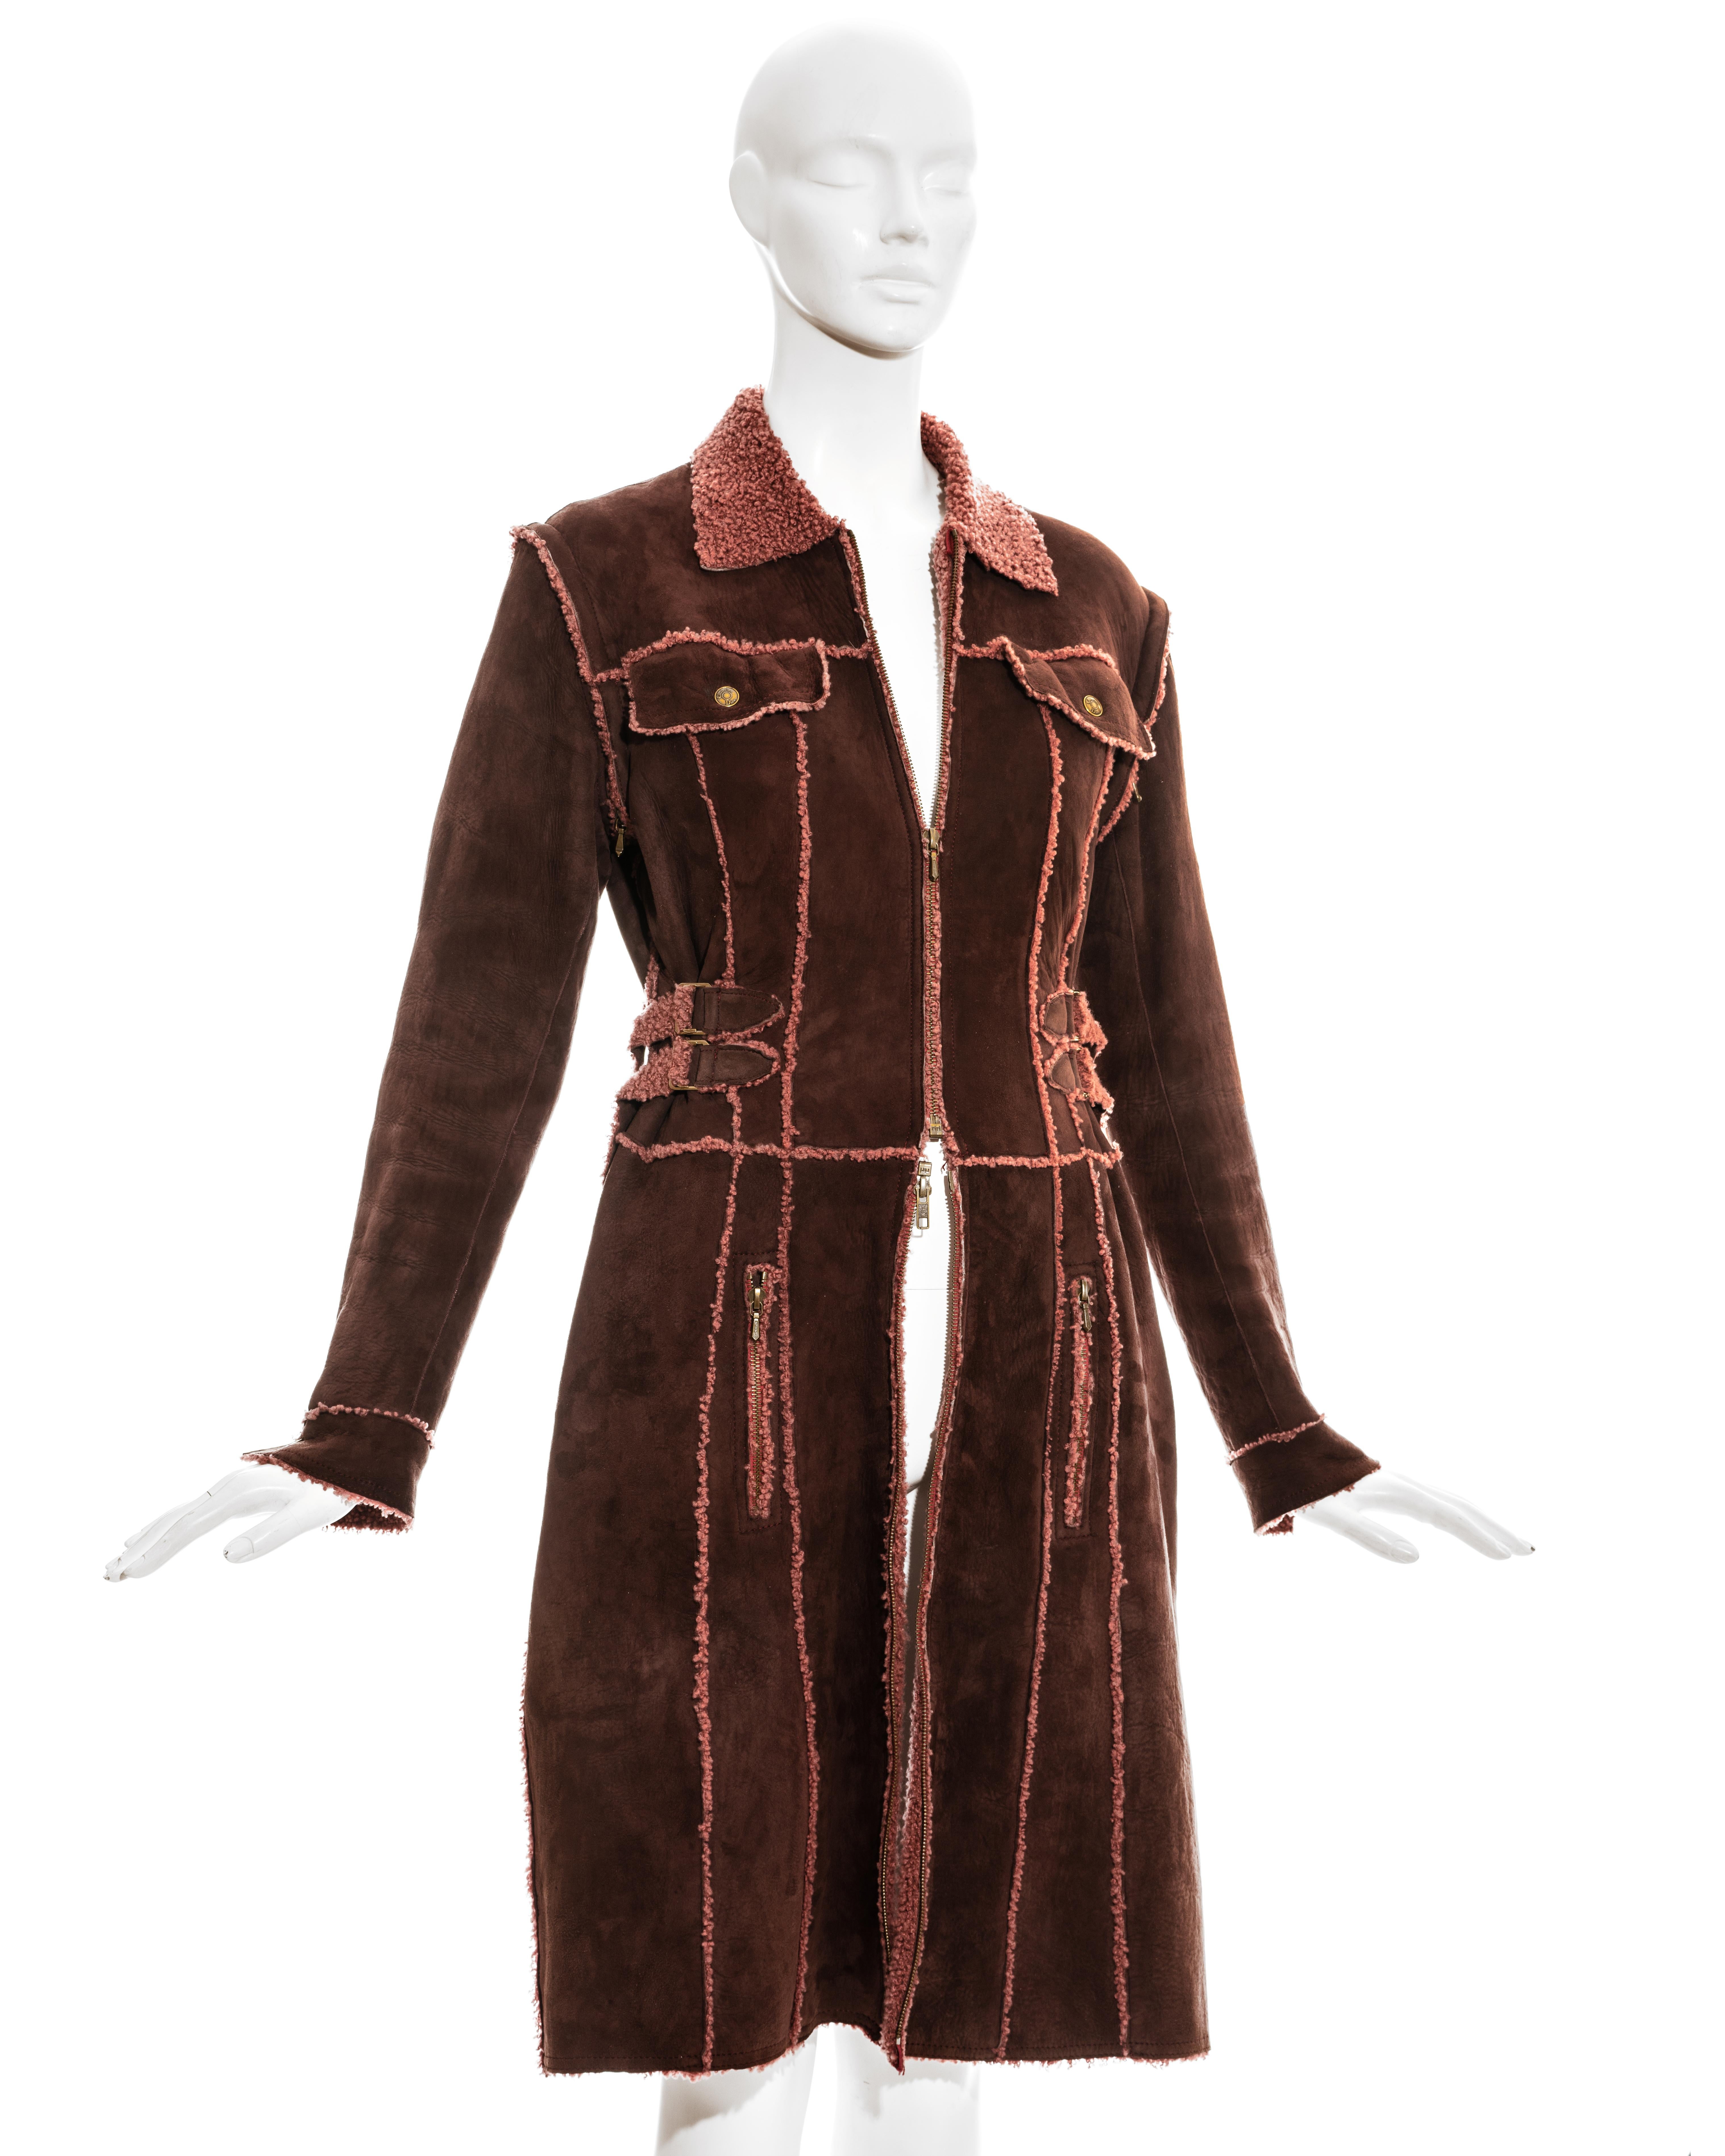 Christian Dior by John Galliano Burgundy shearling mid-length coat with double-ended zipper, detachable sleeves and adjustable buckle side and back fastenings. 

Fall-Winter 2000